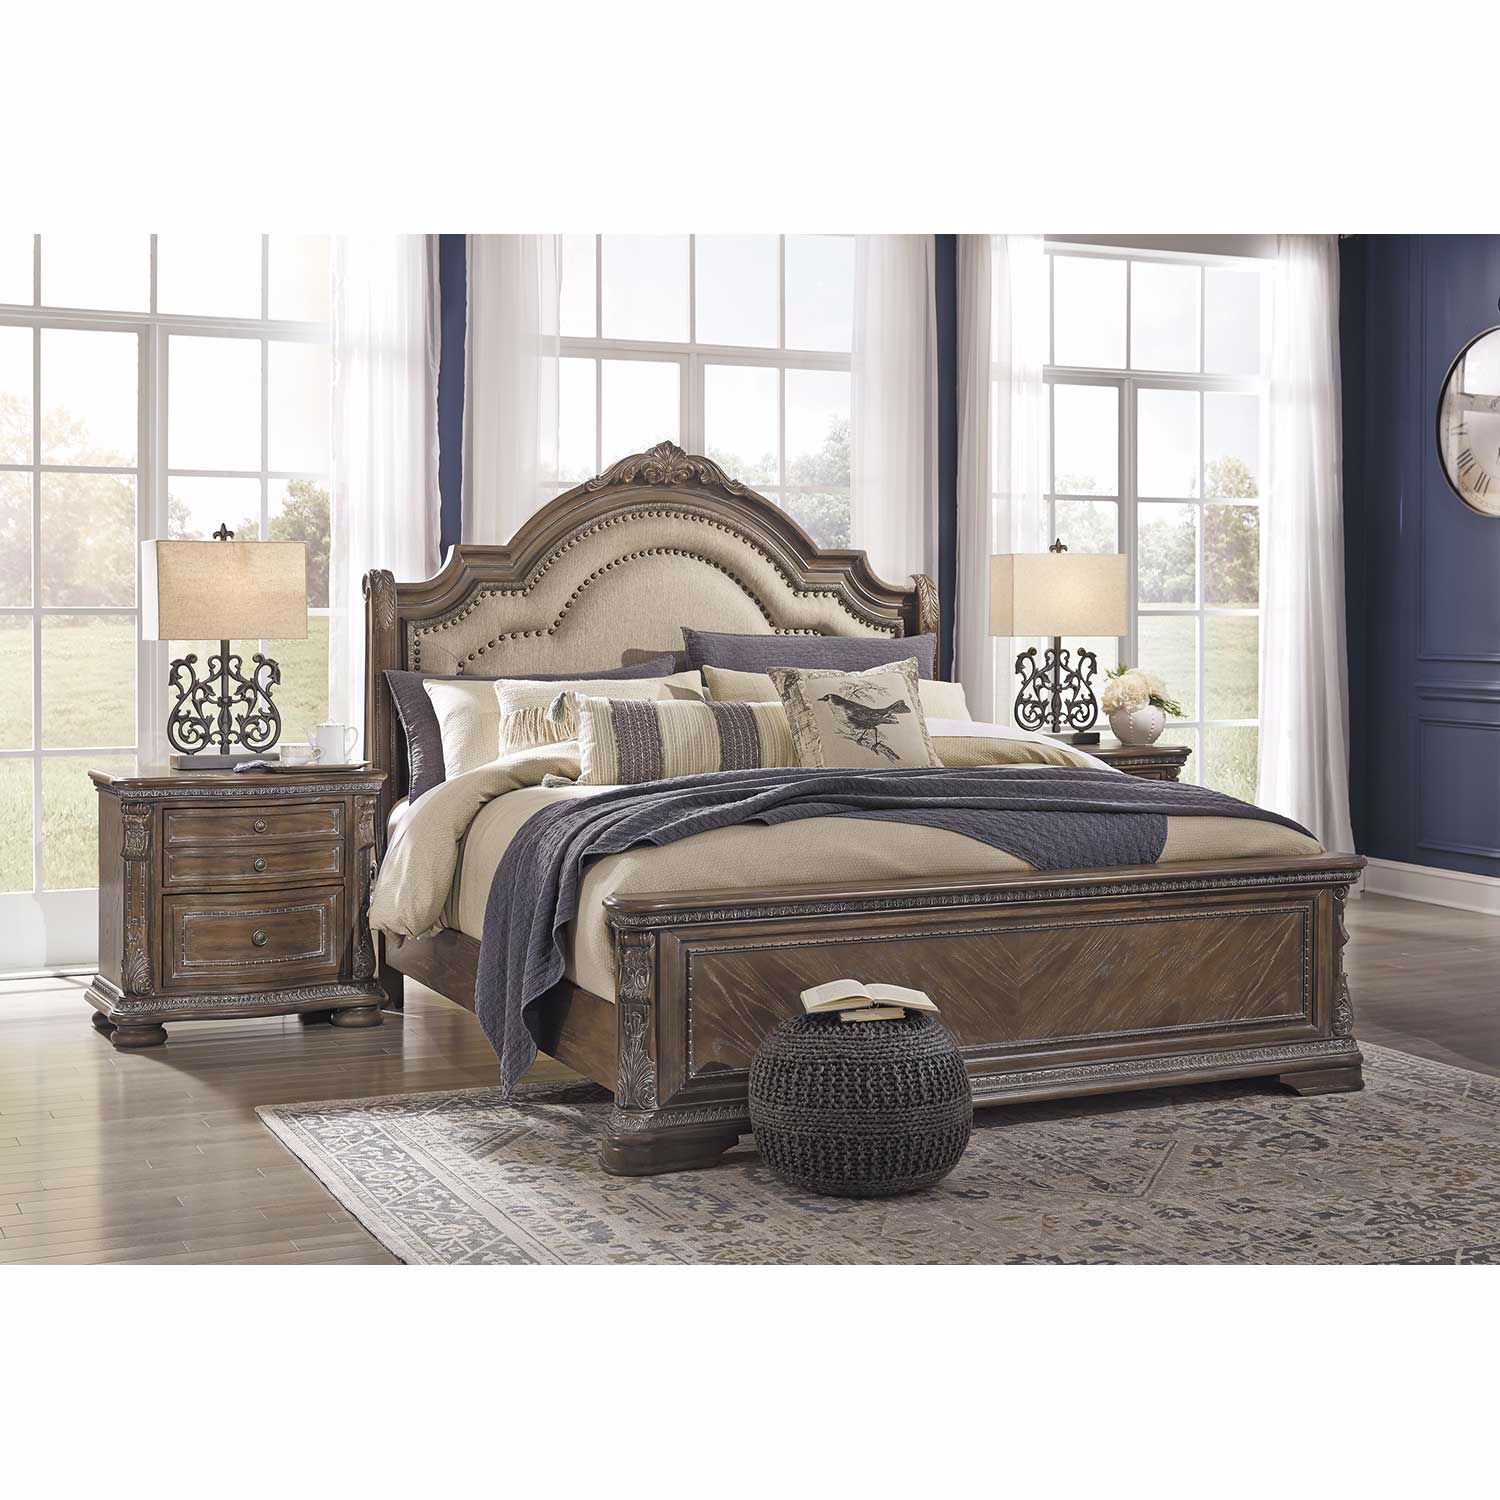 Charmond Upholstered Queen Bed | B803-57 54 96 | Ashley Furniture | AFW.com